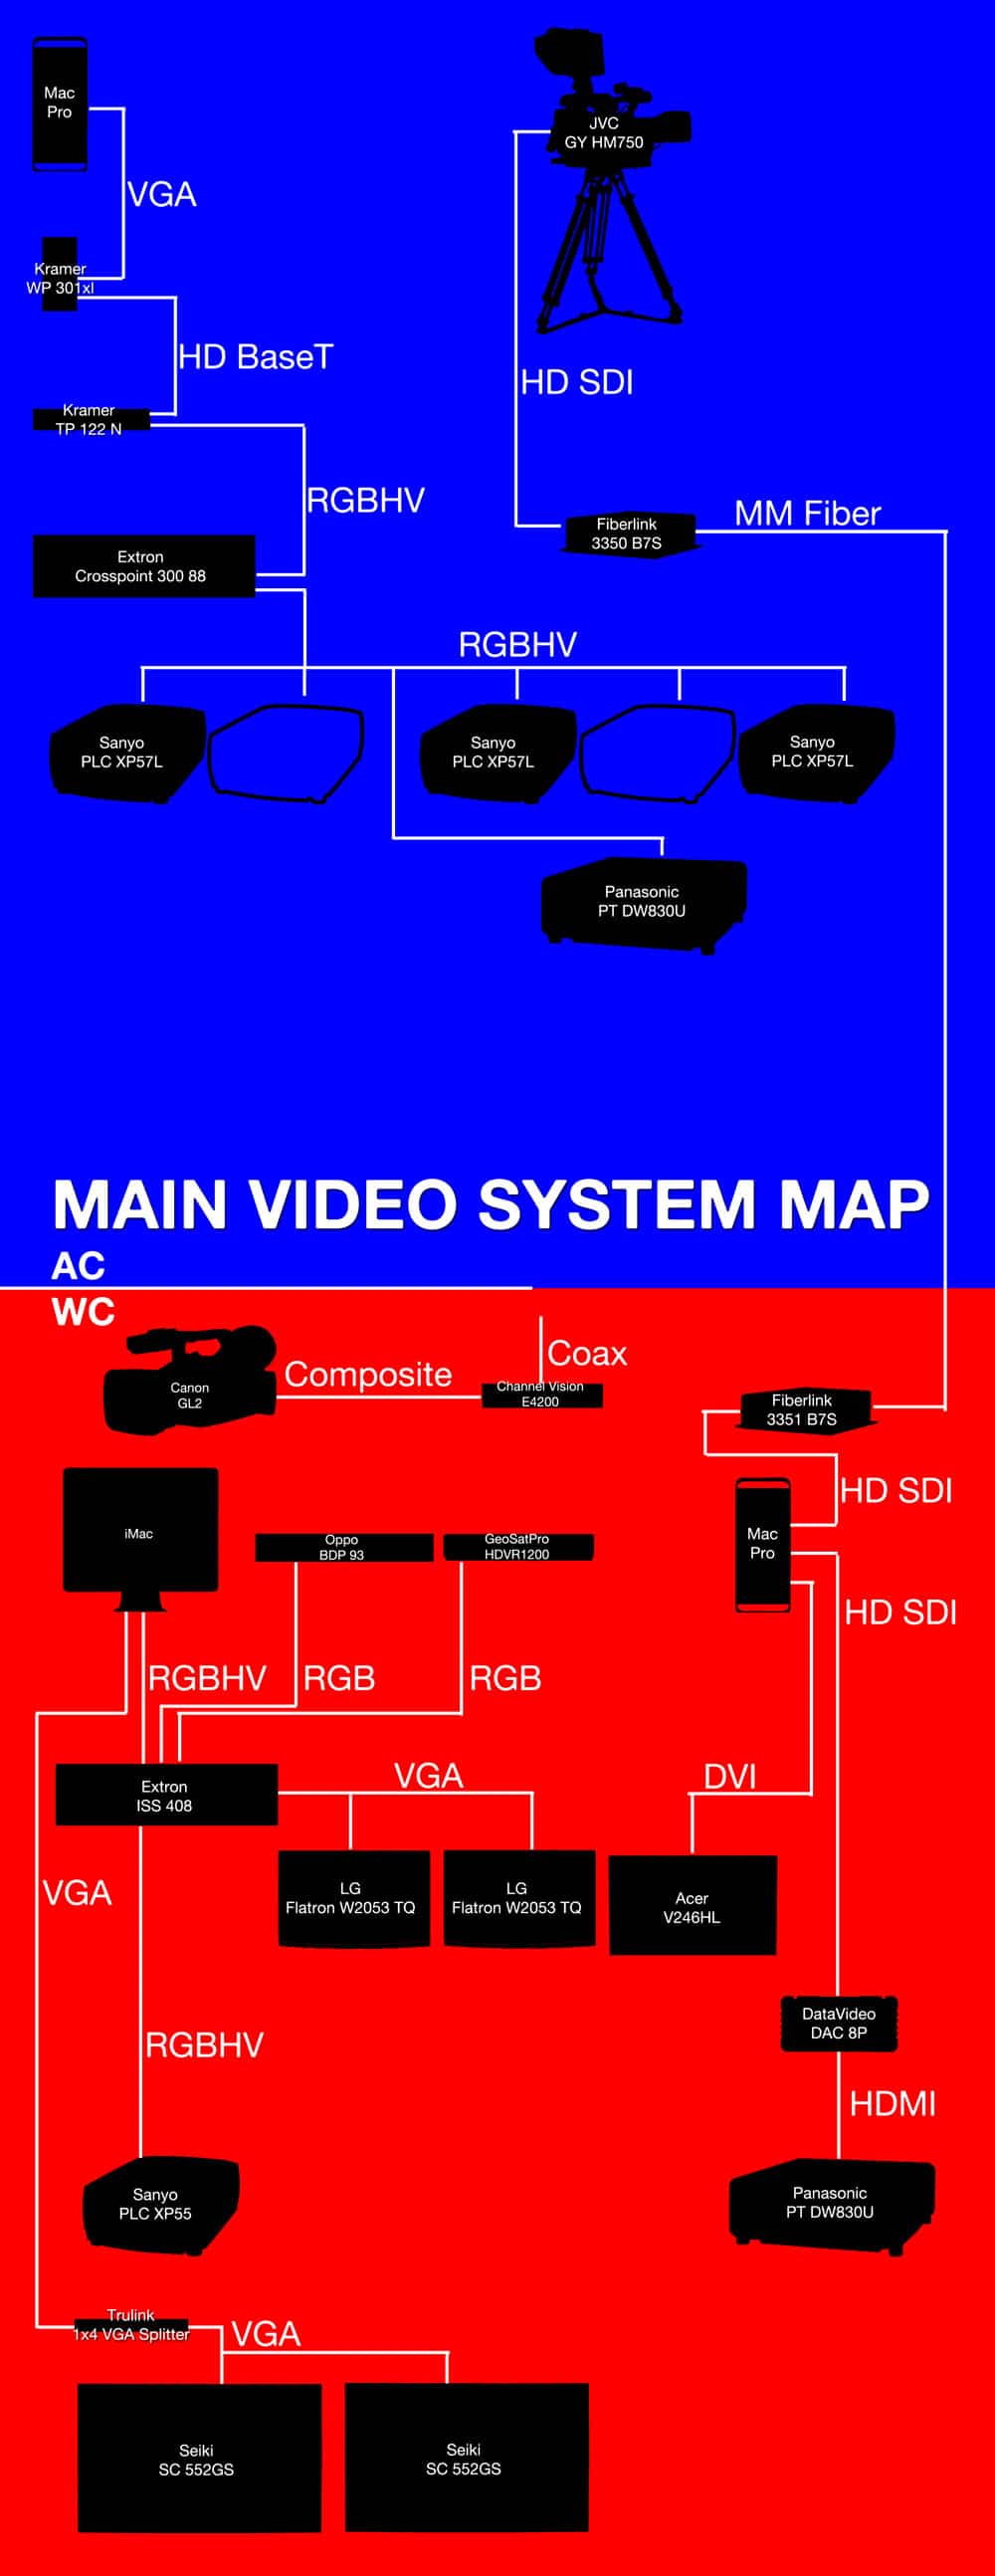 Video-System-Map